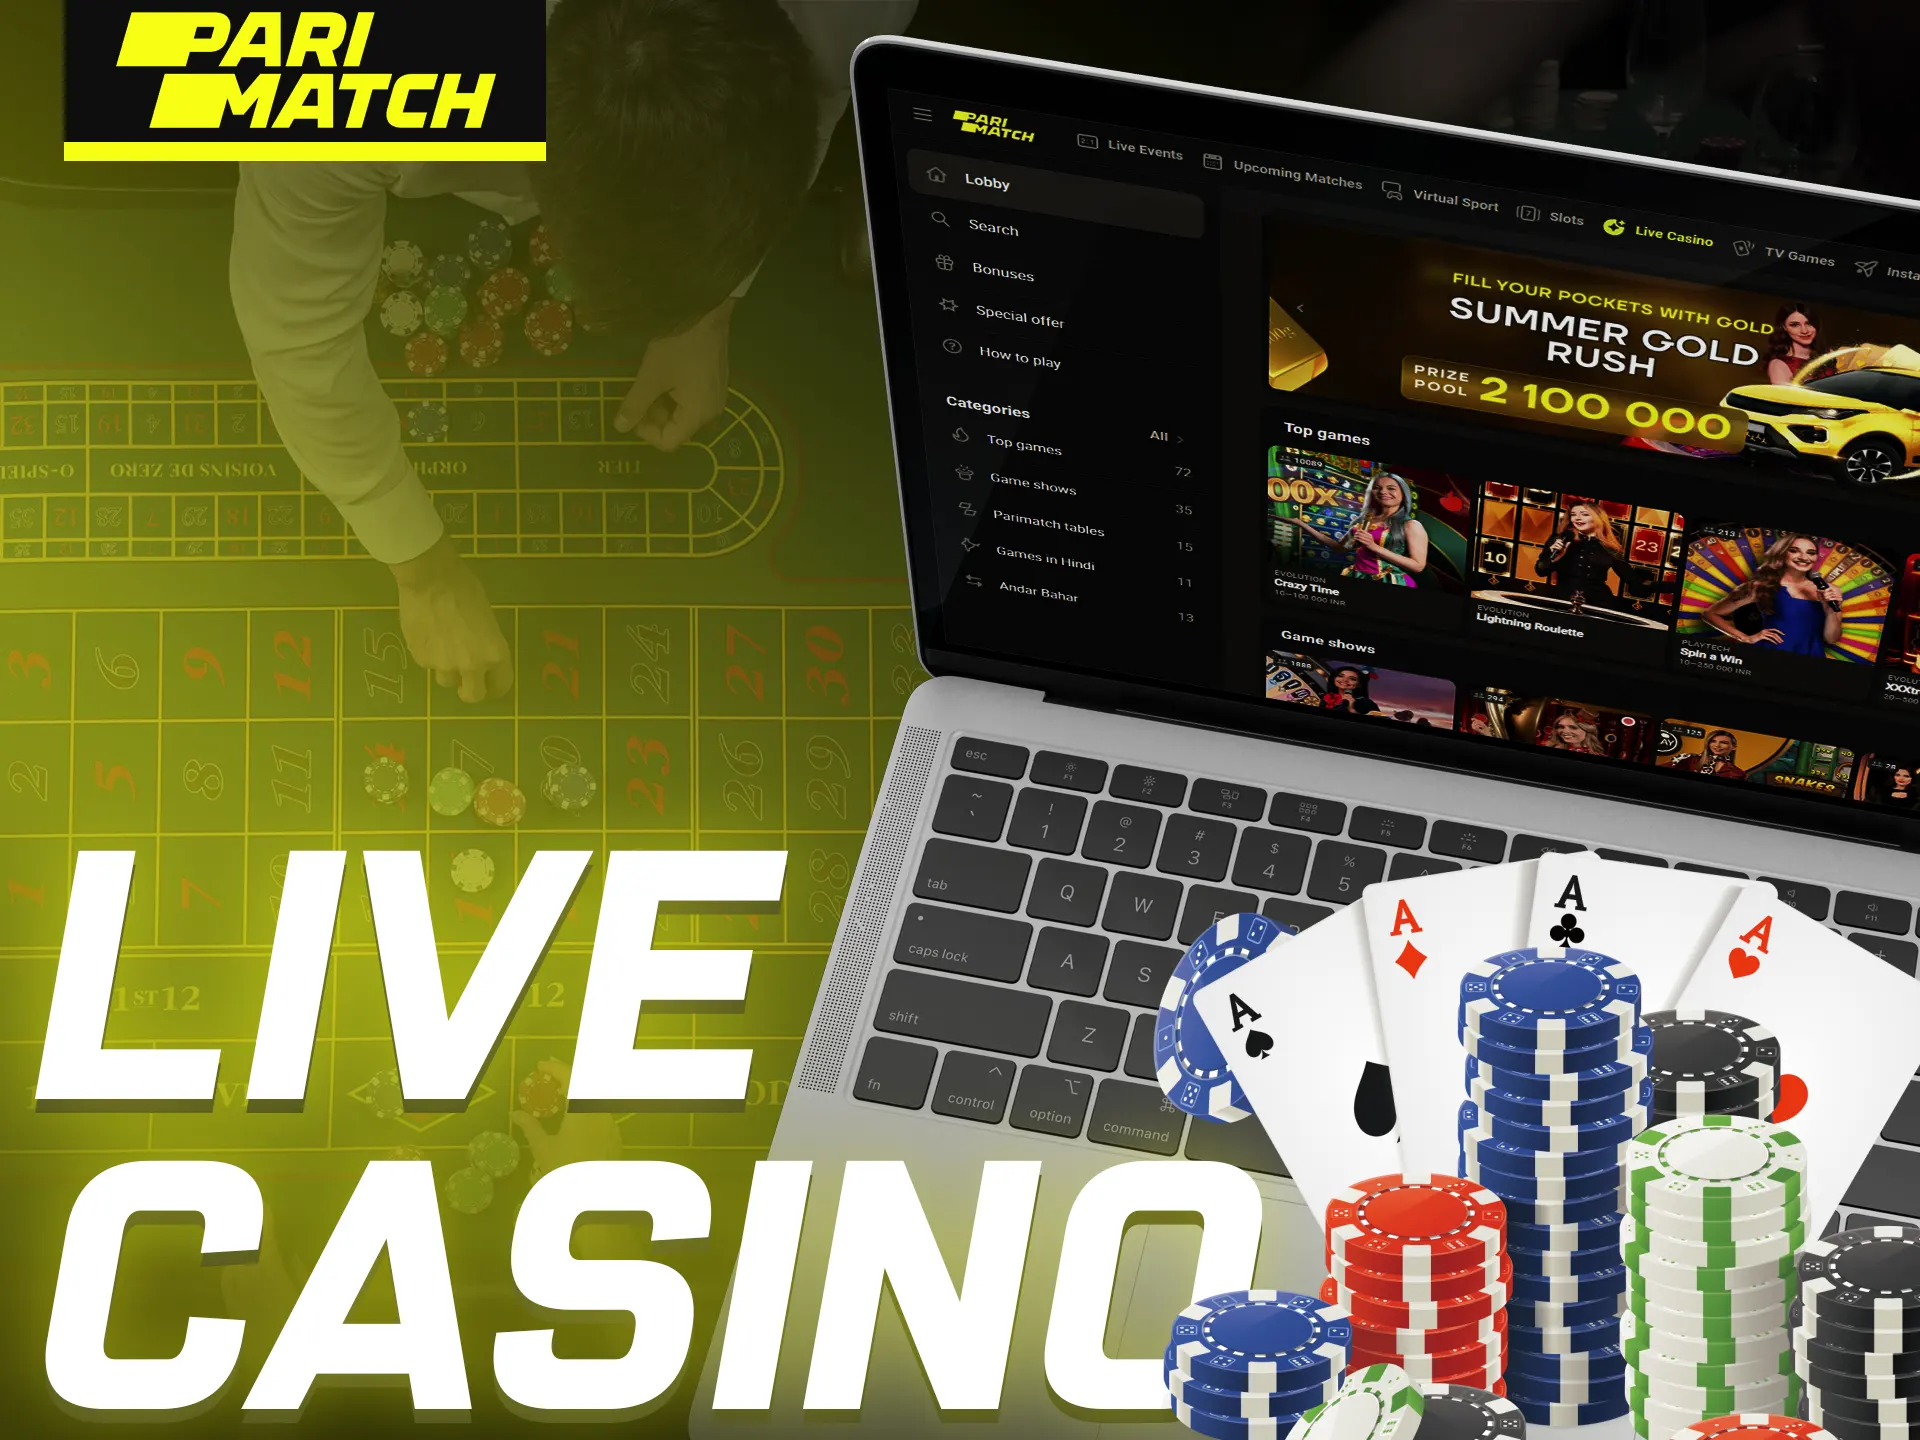 Live casino games are available in a variety of formats.